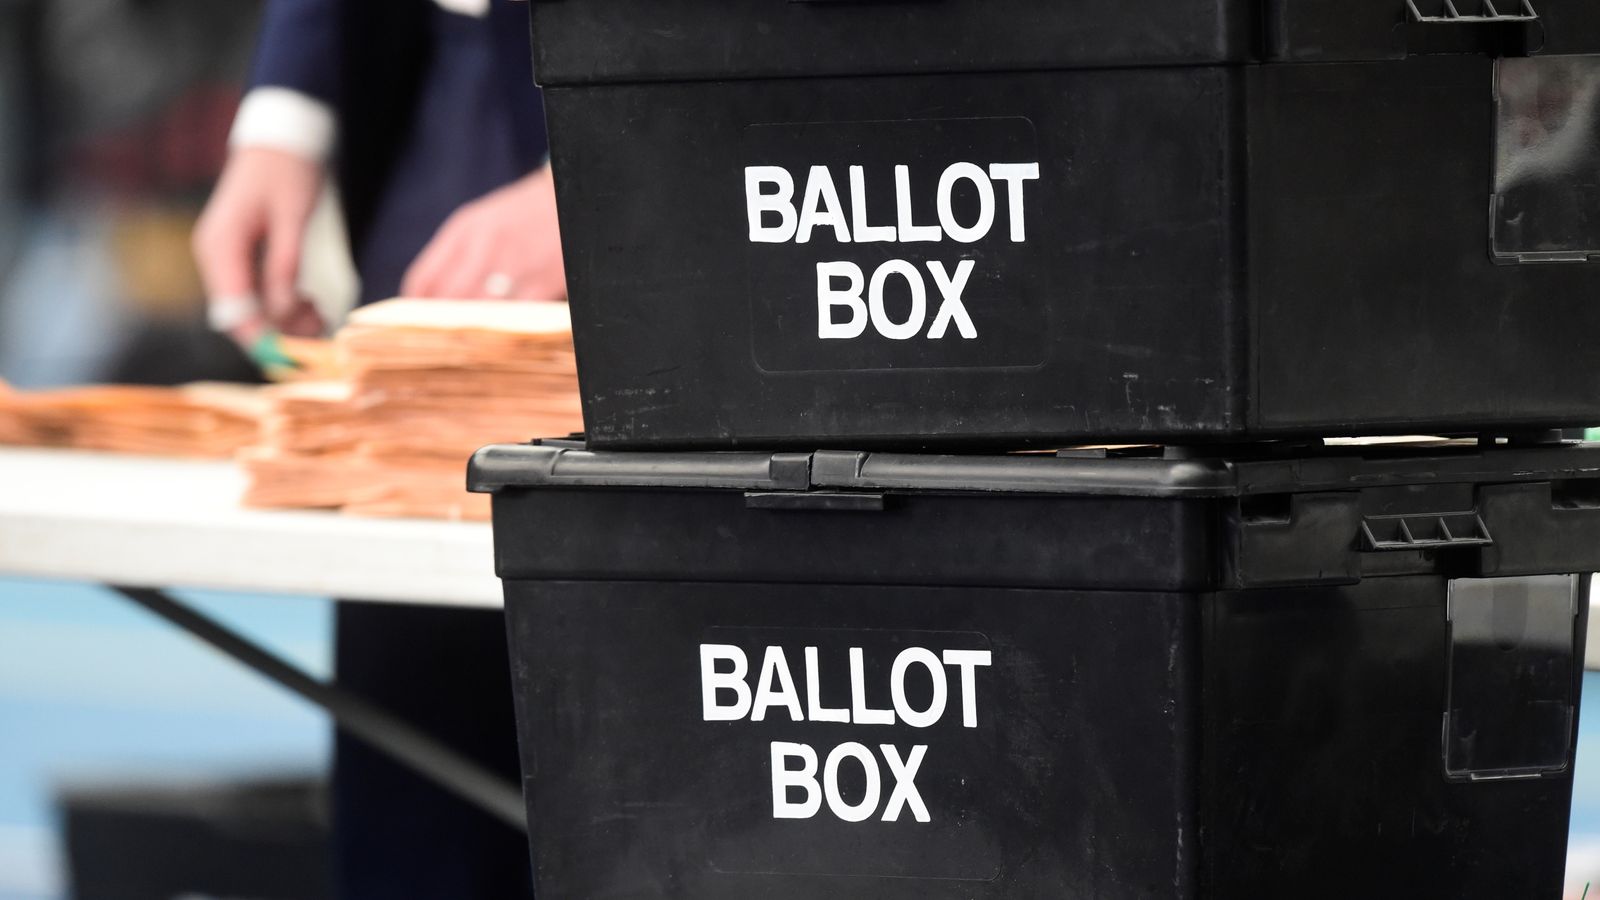 Two senior Tory MPs in jeopardy as plans for major shake-up of UK's constituencies revealed